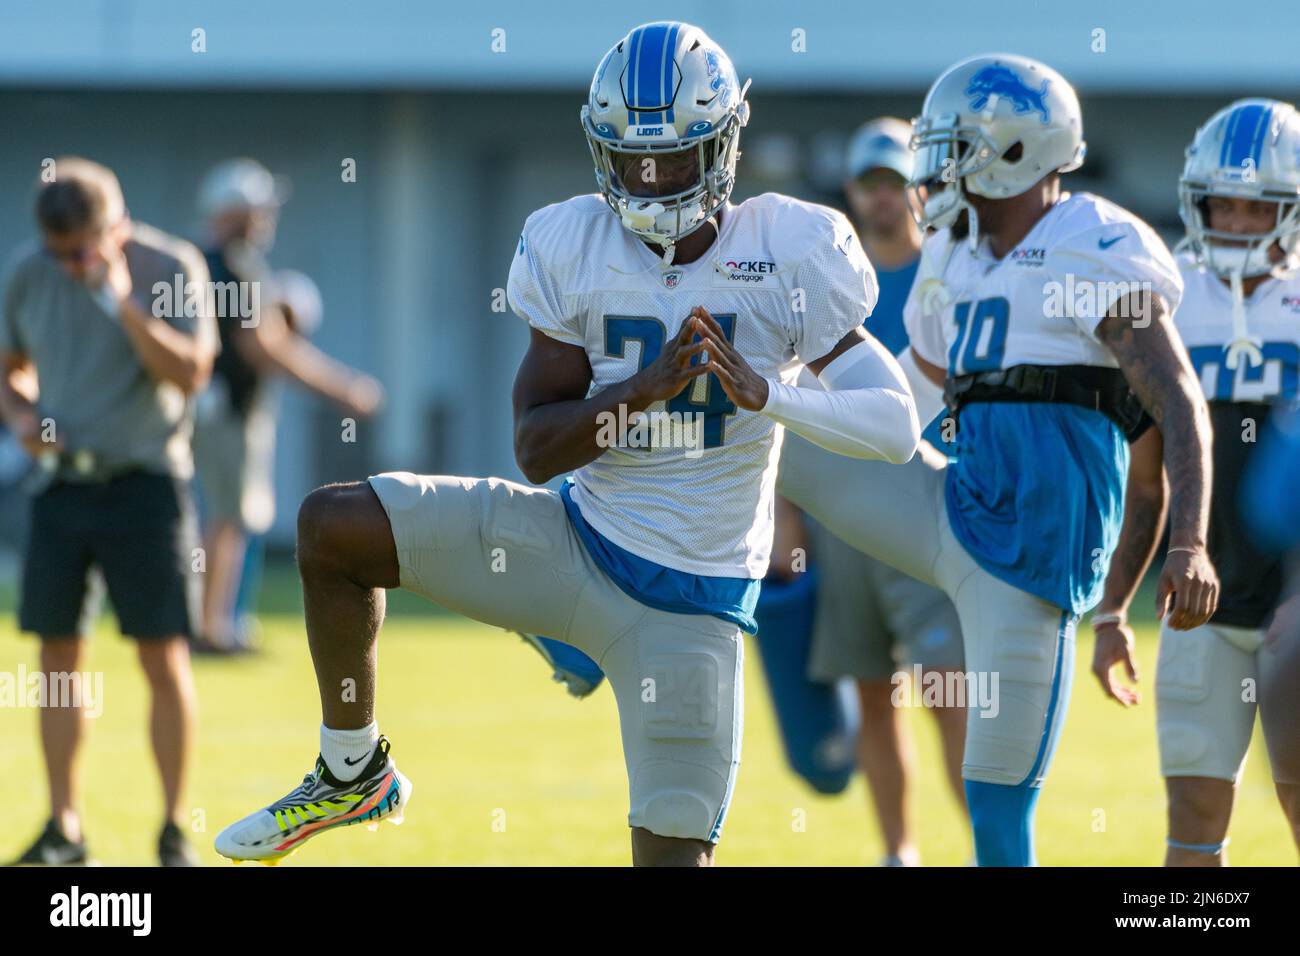 ALLEN PARK, MI - AUGUST 09: Detroit Lions CB Amani Oruwariye (24) during Lions training camp on August 9, 2022 at Detroiit Lions Training Facility in Allen Park, MI (Photo by Allan Dranberg/CSM) Credit: Cal Sport Media/Alamy Live News Stock Photo